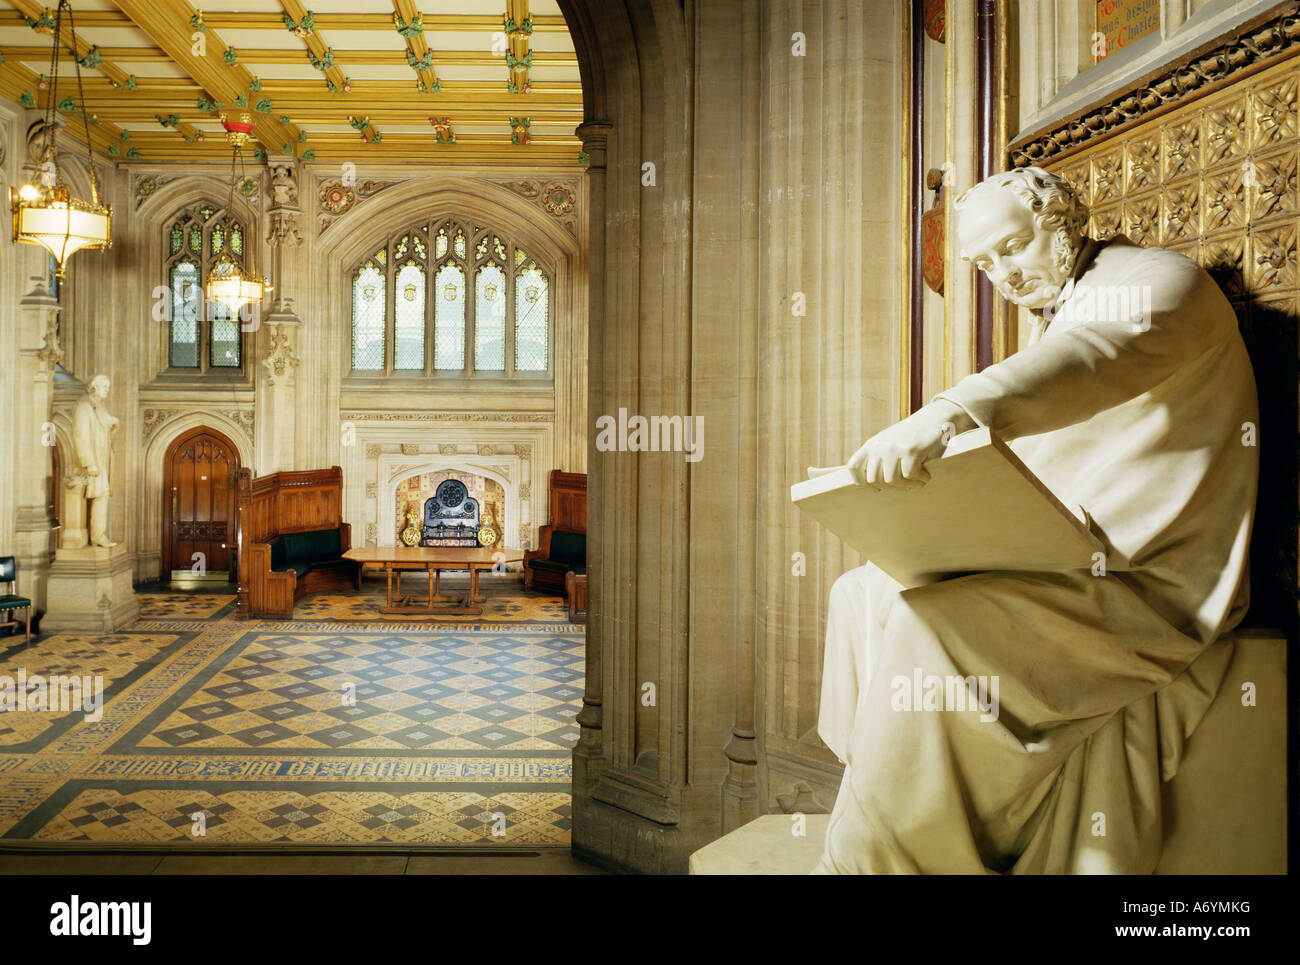 Lower waiting hall with statue of the architect Barry House of Commons Houses of Parliament Westminster London England Uni Stock Photo